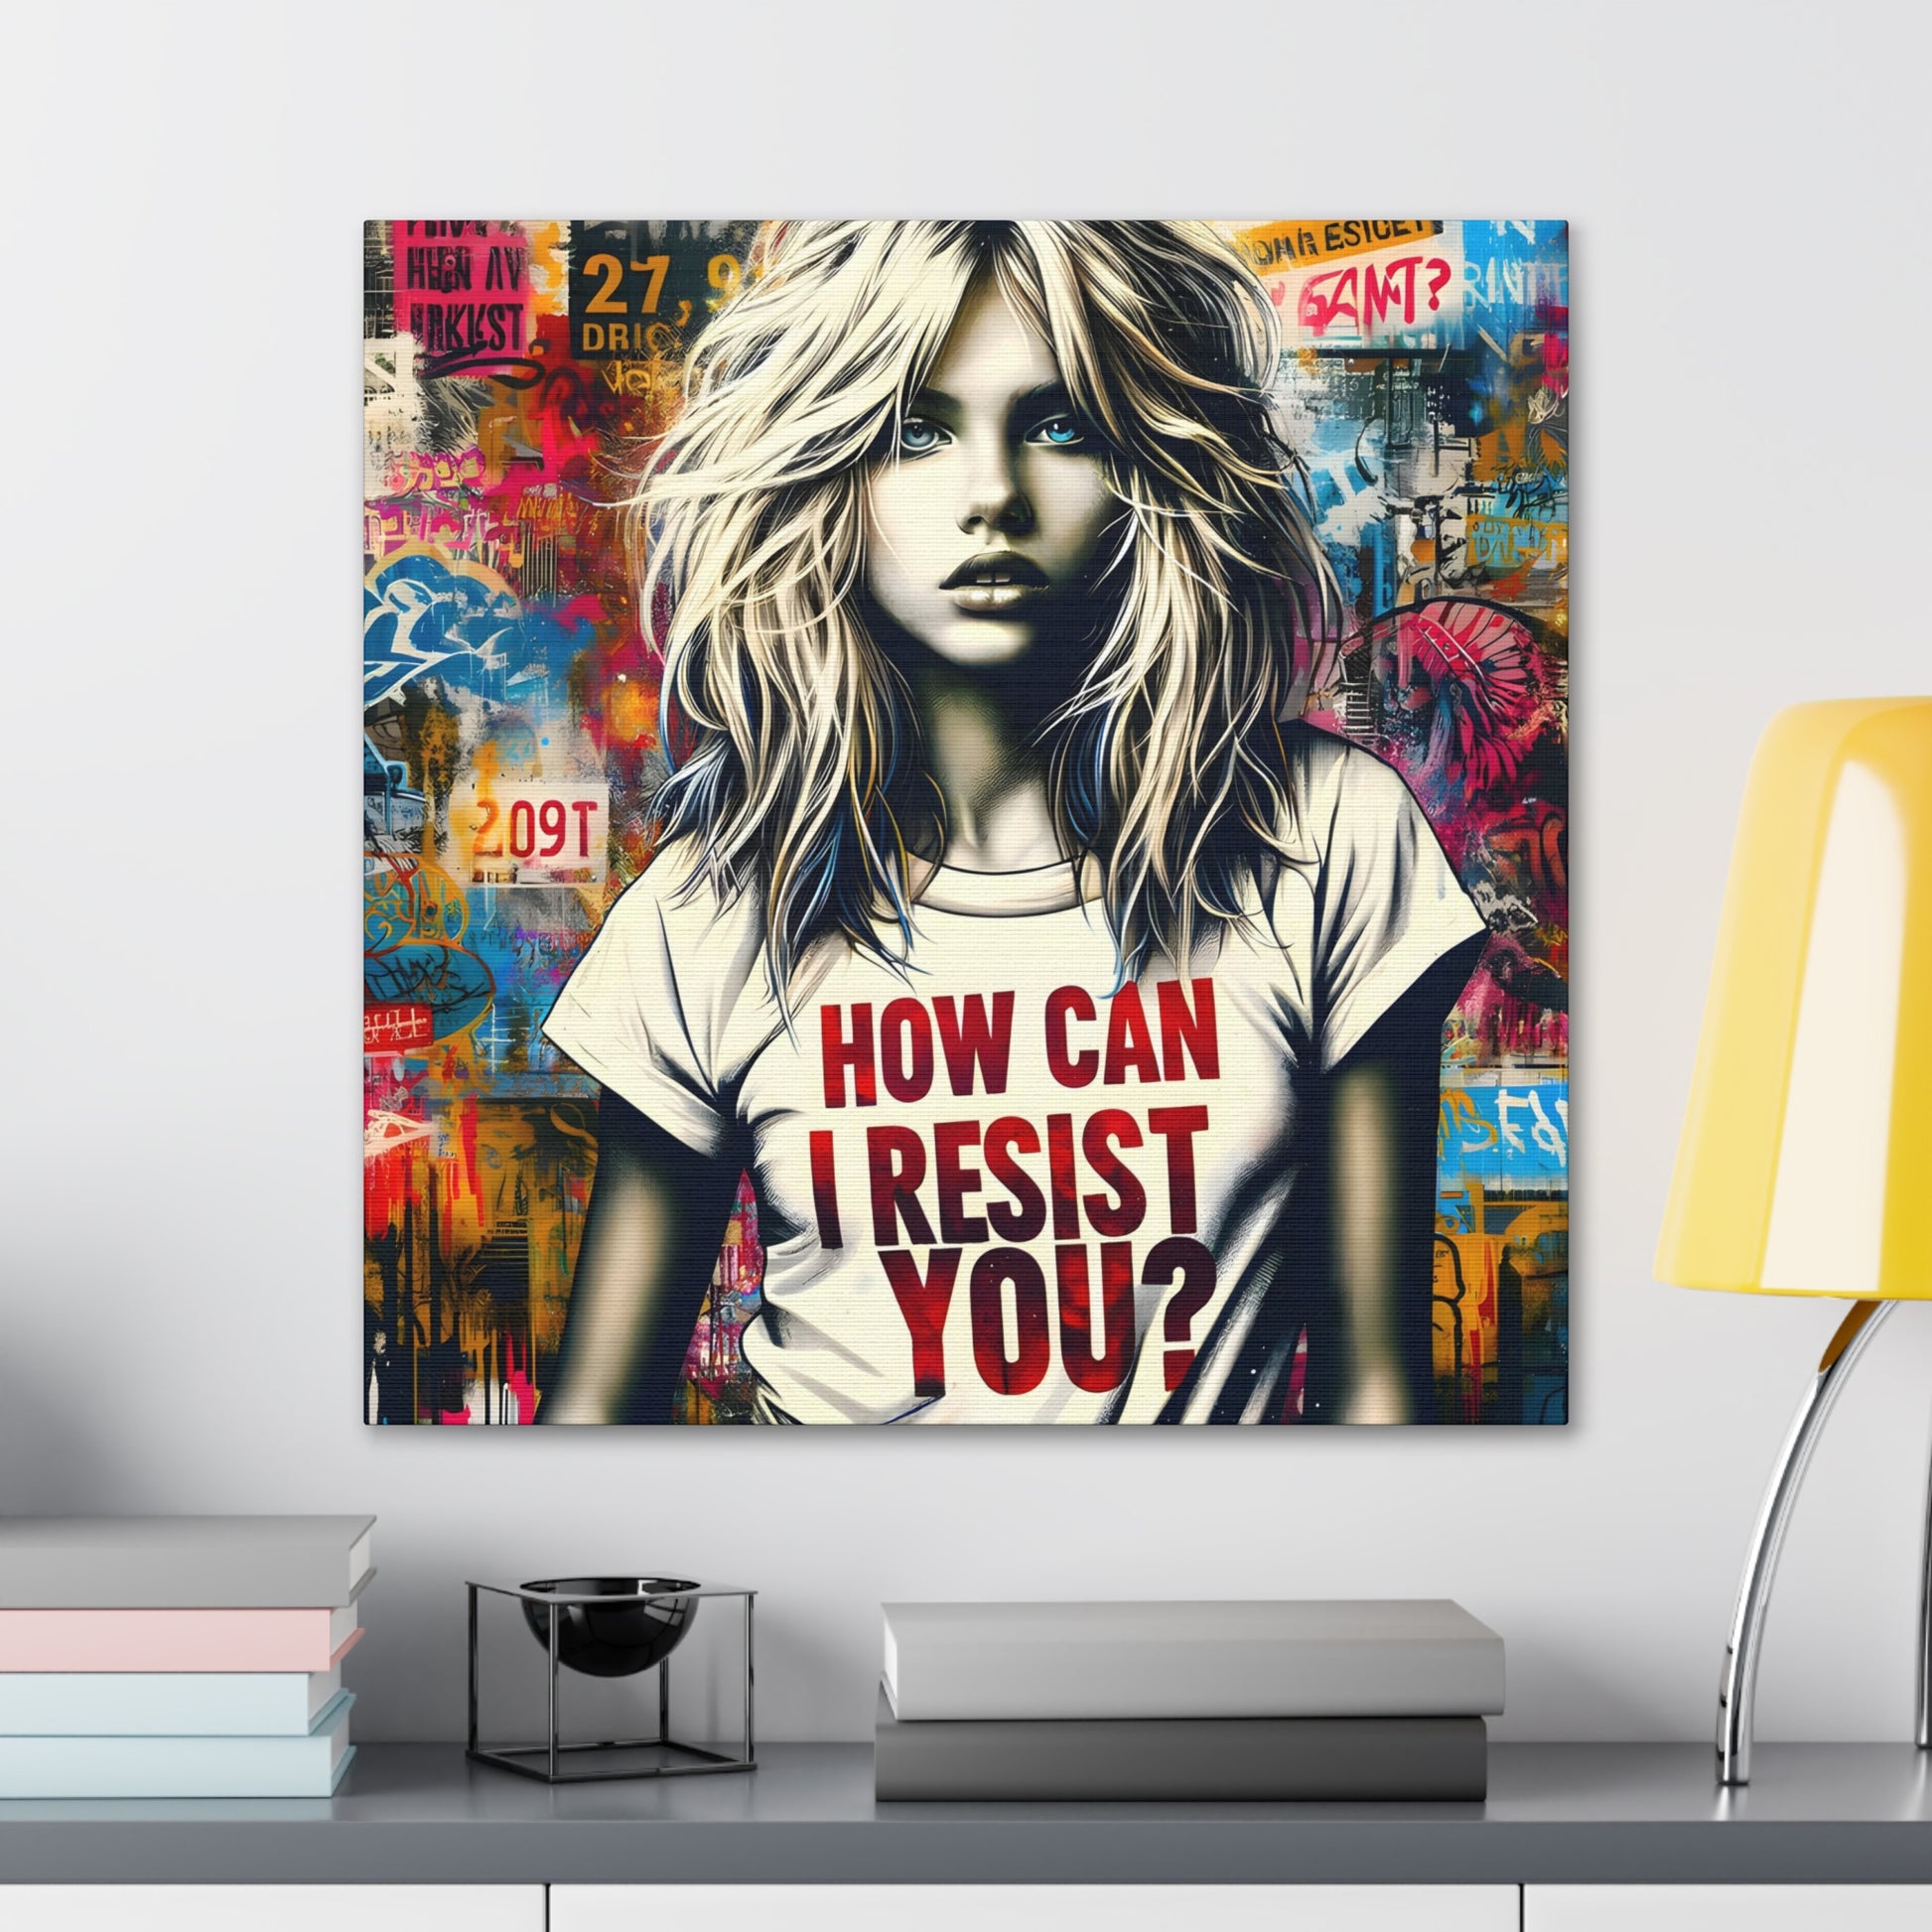 in situ desk shot AI-generated art, 'Resist You? – An ABBA Echo,' with a modern Aphrodite in urban setting, her shirt reading 'HOW CAN I RESIST YOU?' amidst colorful graffiti, echoing ABBA's themes.